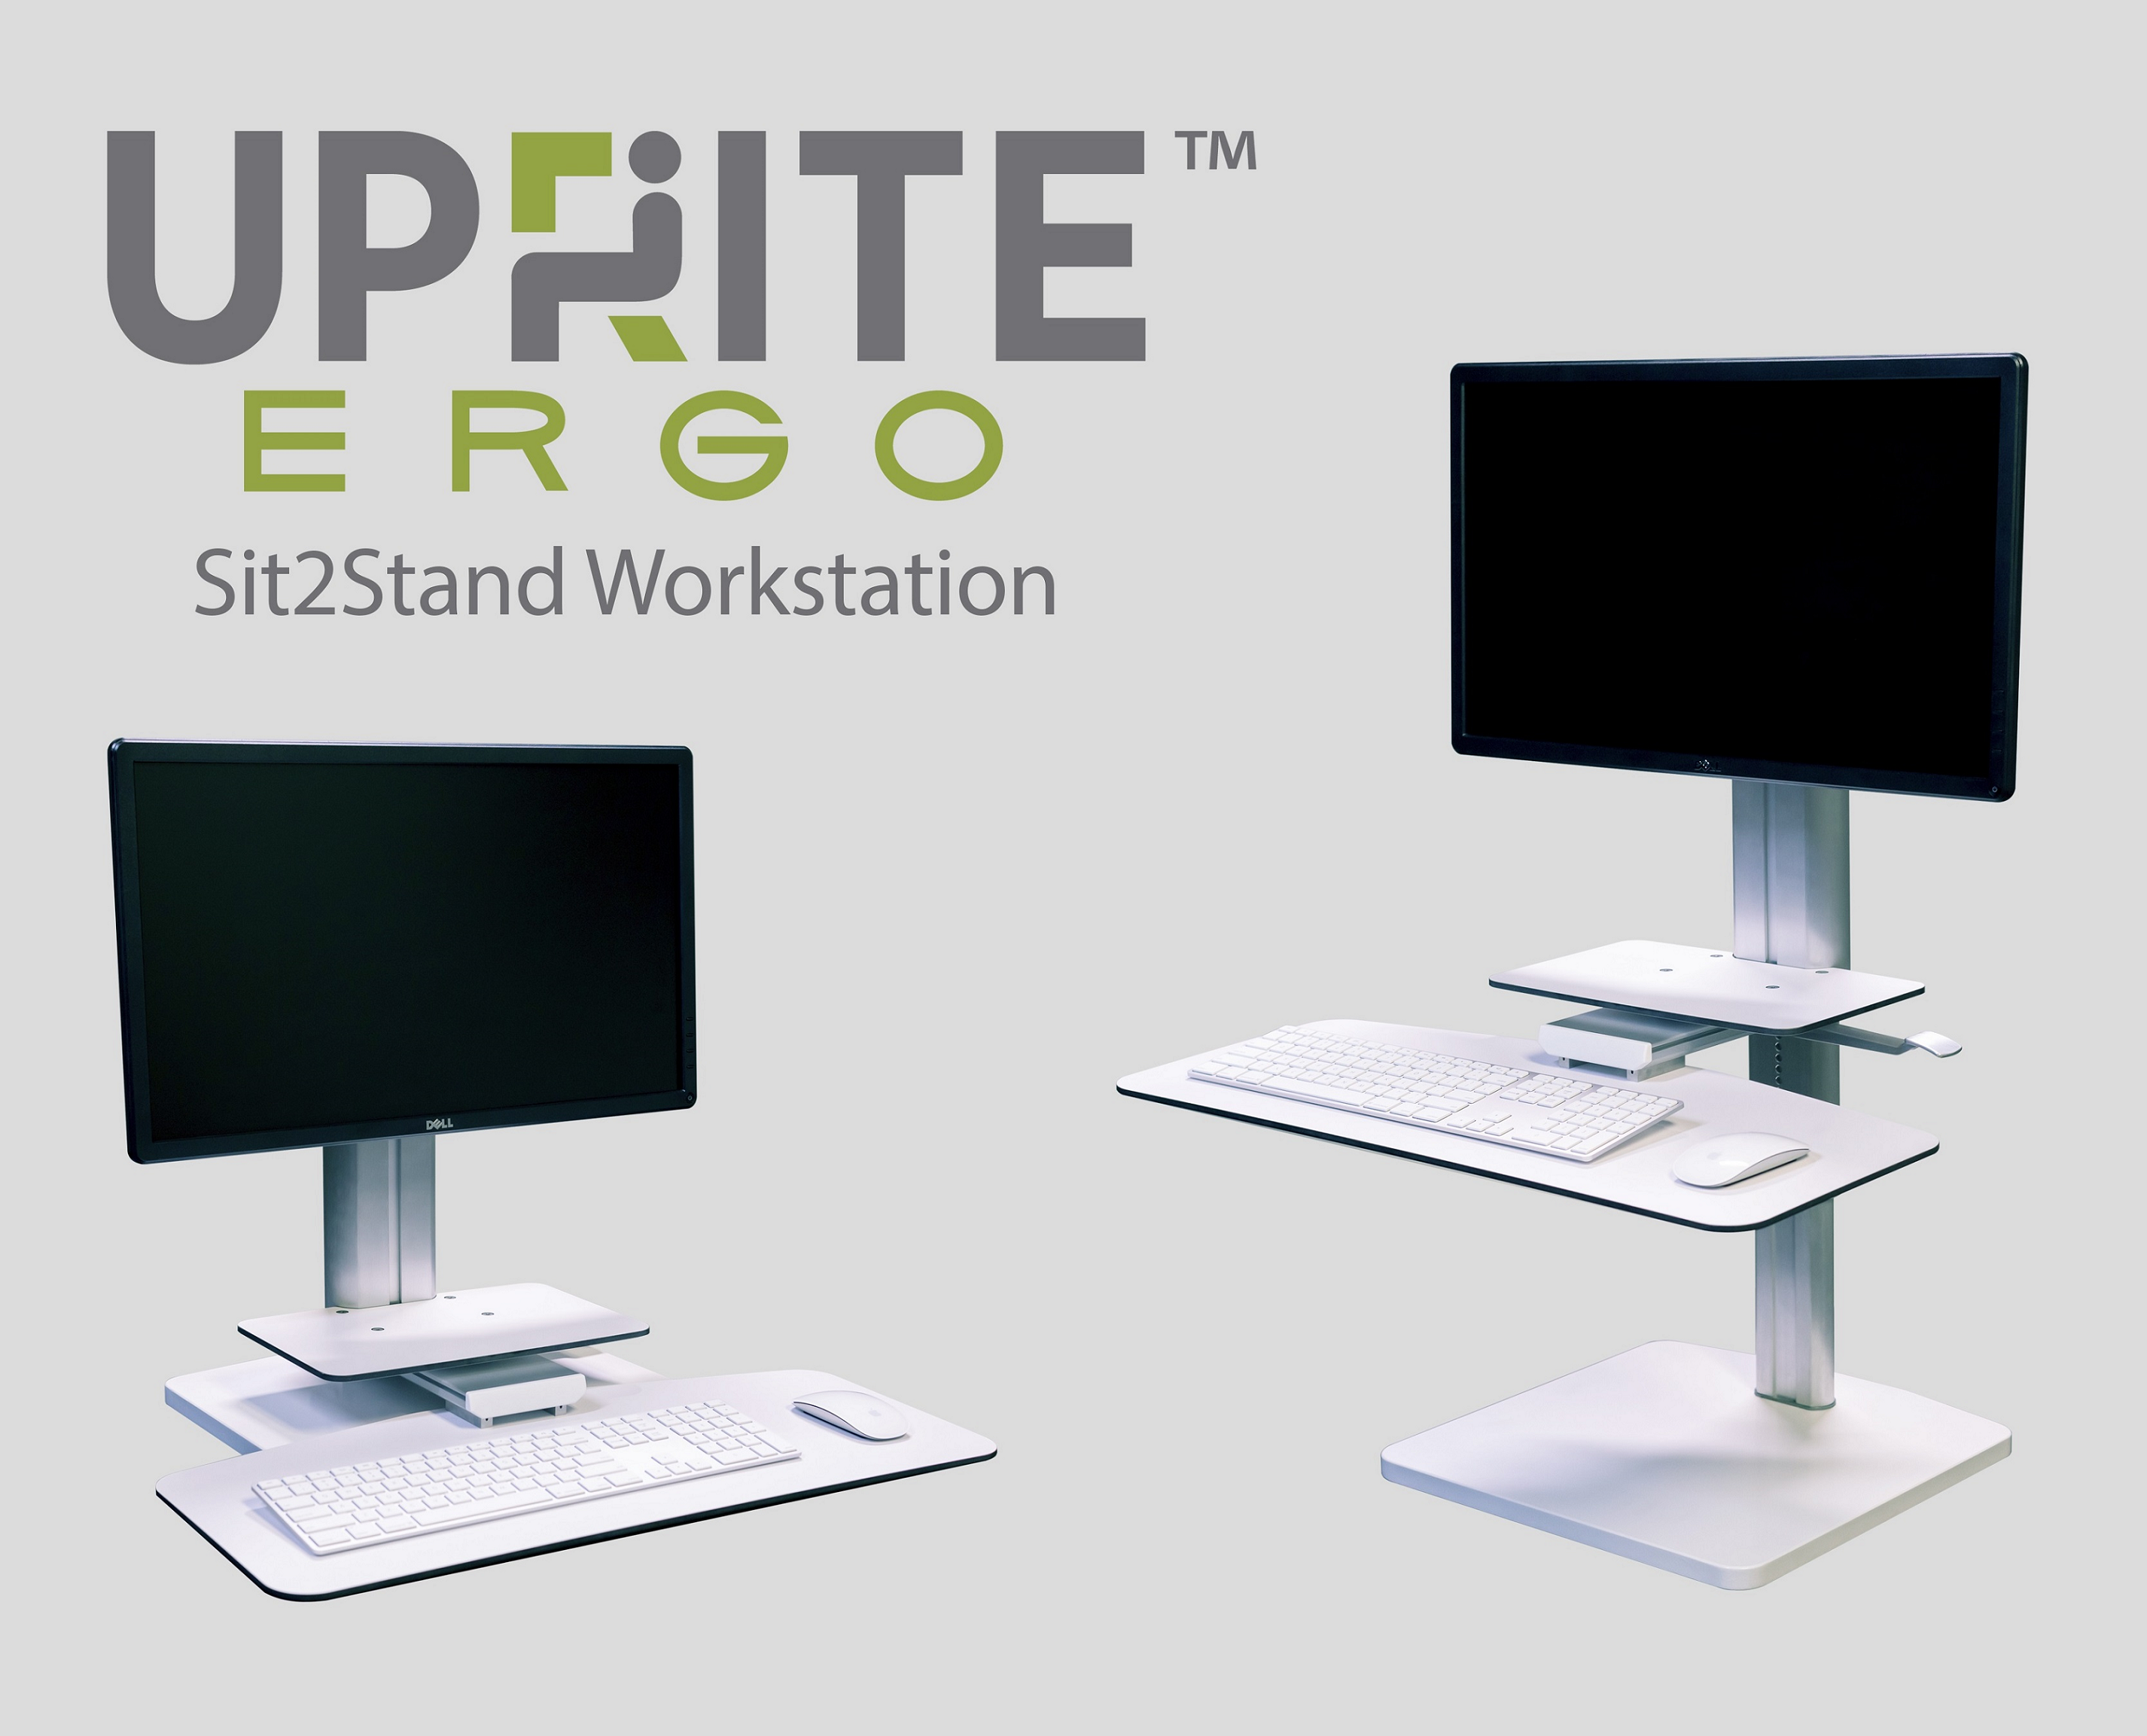 The Uprite Ergo Sit2Stand is revolutionizing standing workstations